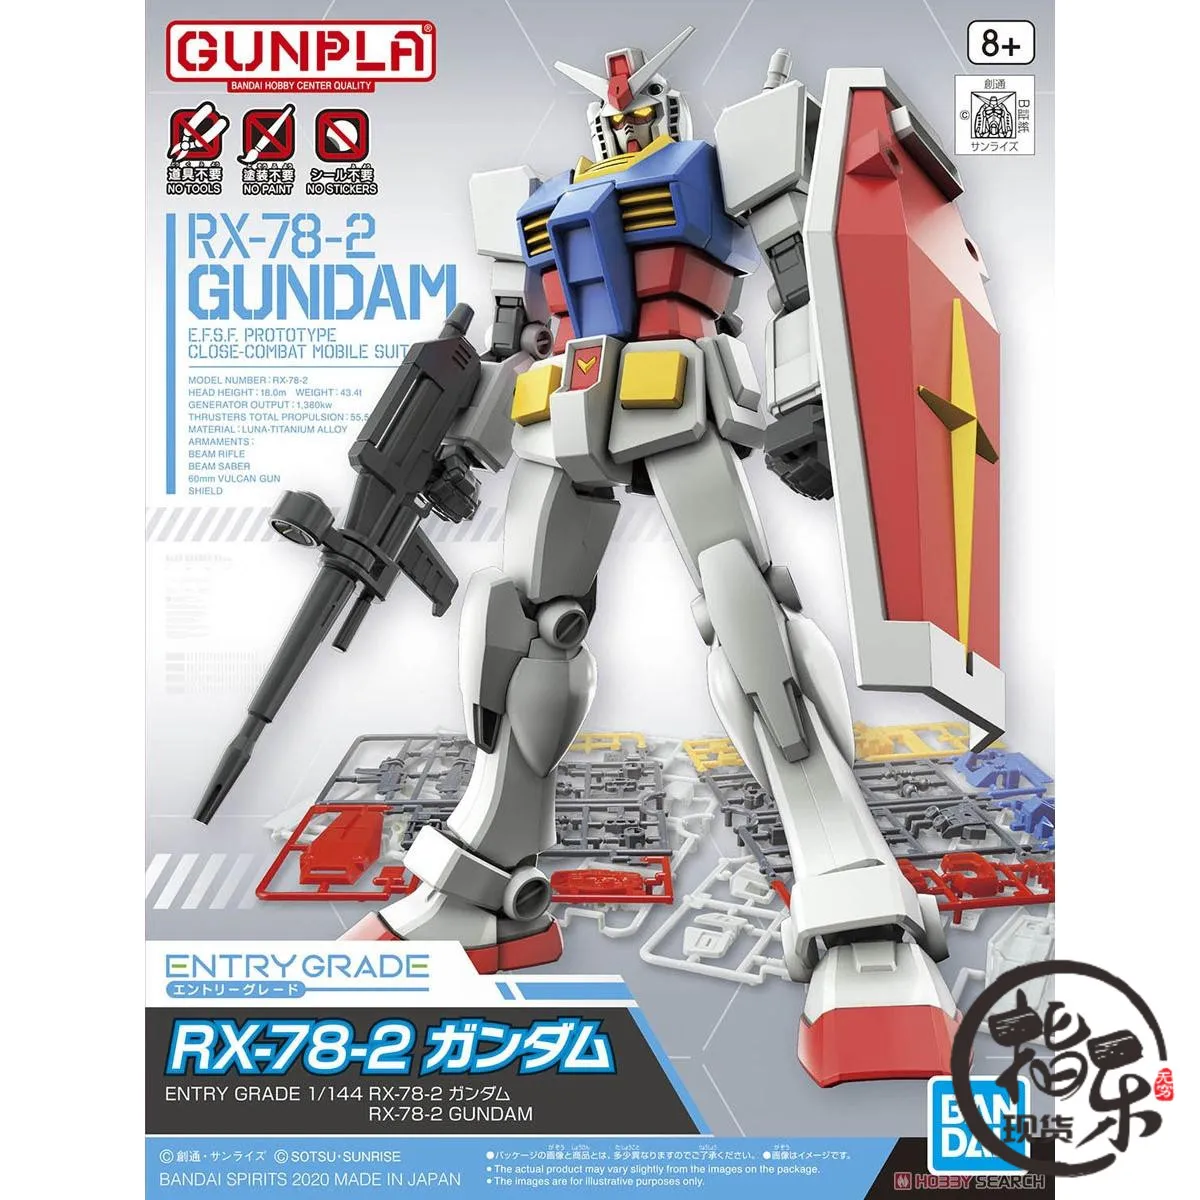 

Bandai ETCHING PARTS FOR ENTRY GRADE RX-78-2 GUNDAM Ver.EG,1/144 Metal Modeling Upgrade Kits Accessory With Box